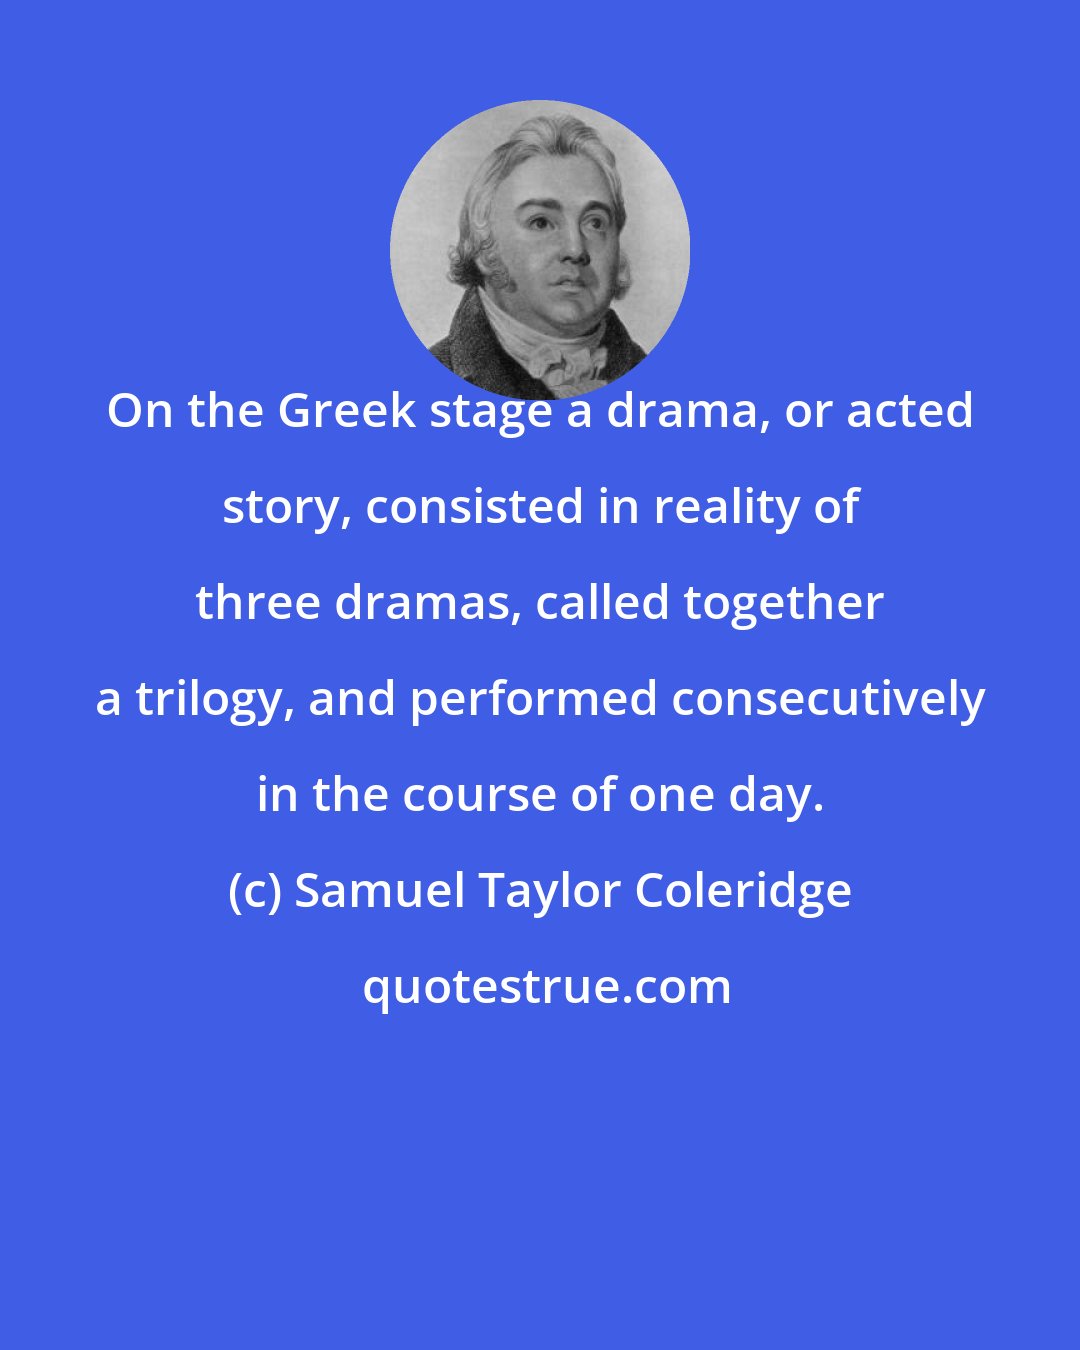 Samuel Taylor Coleridge: On the Greek stage a drama, or acted story, consisted in reality of three dramas, called together a trilogy, and performed consecutively in the course of one day.